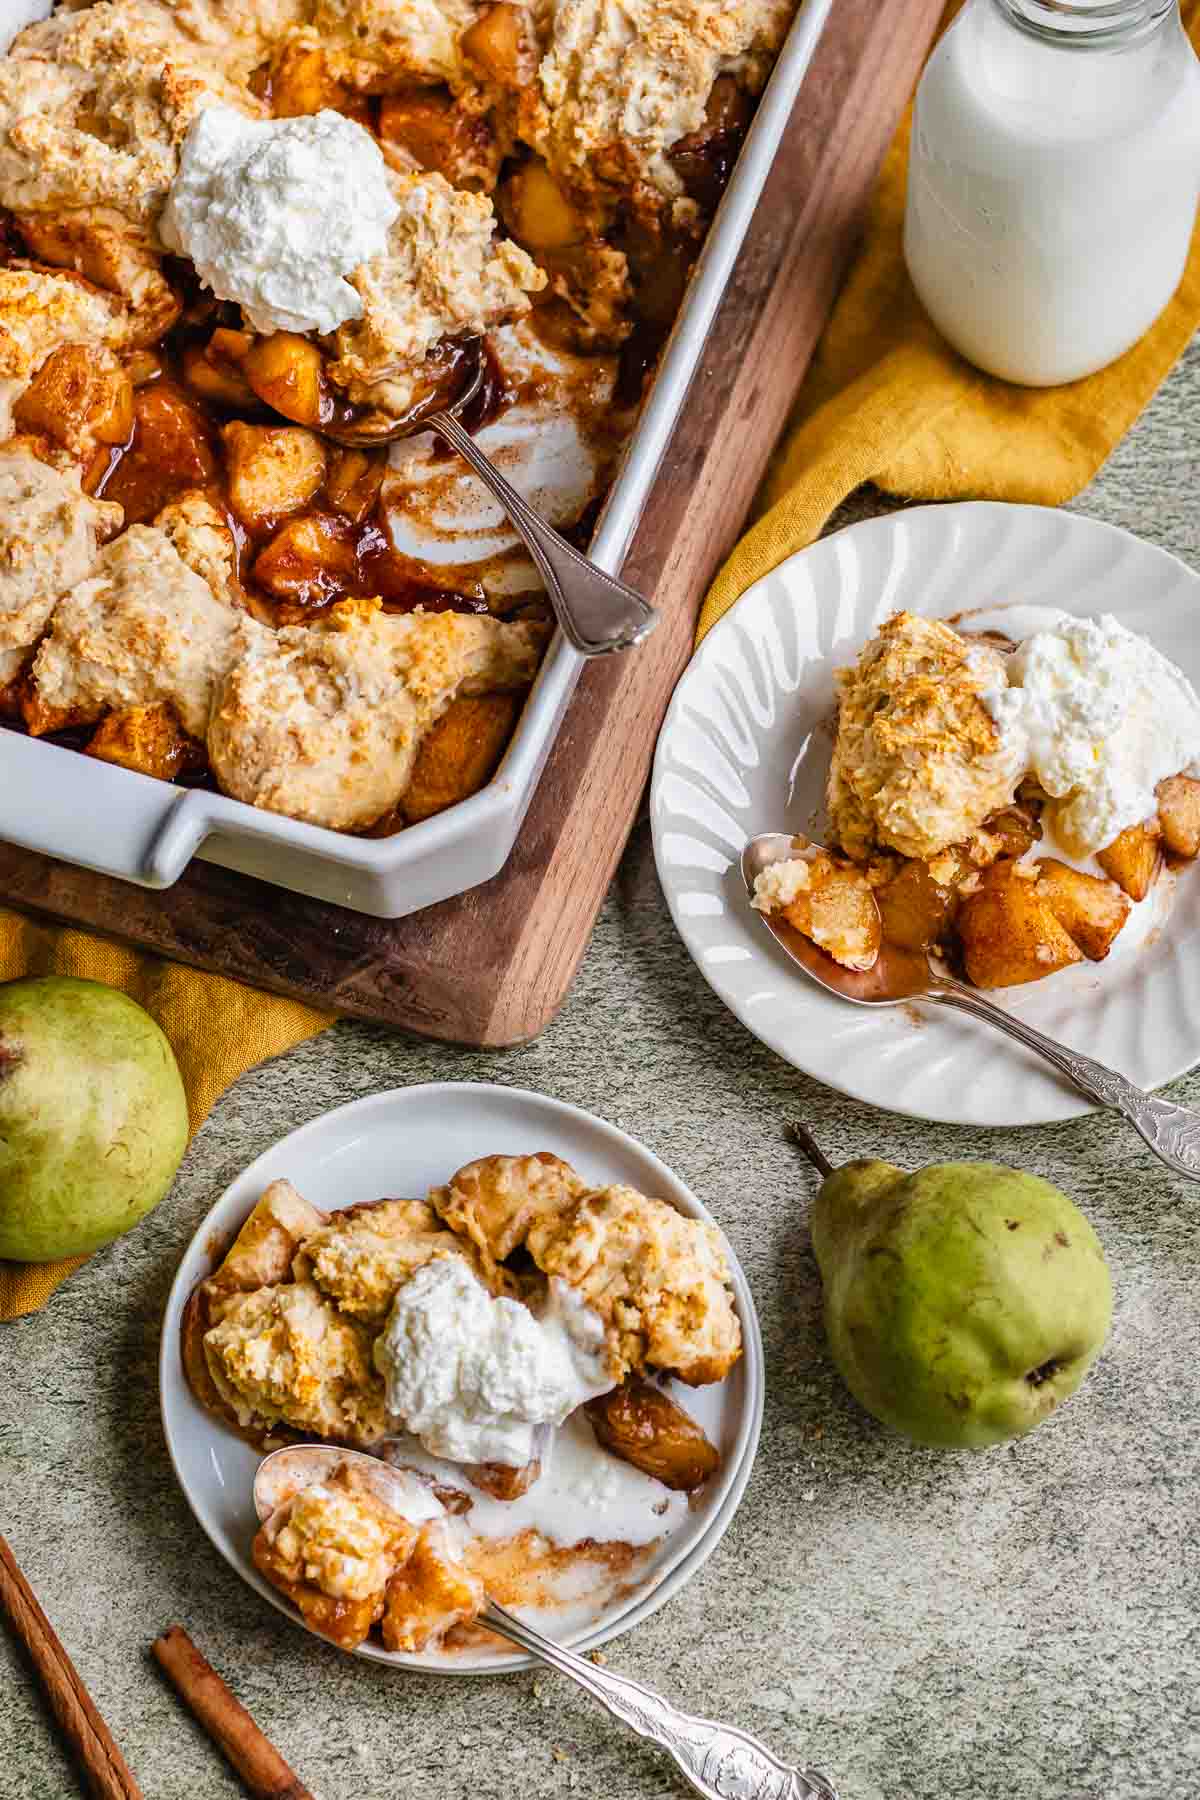 Two plates of pear cobbler next to a casserole dish.